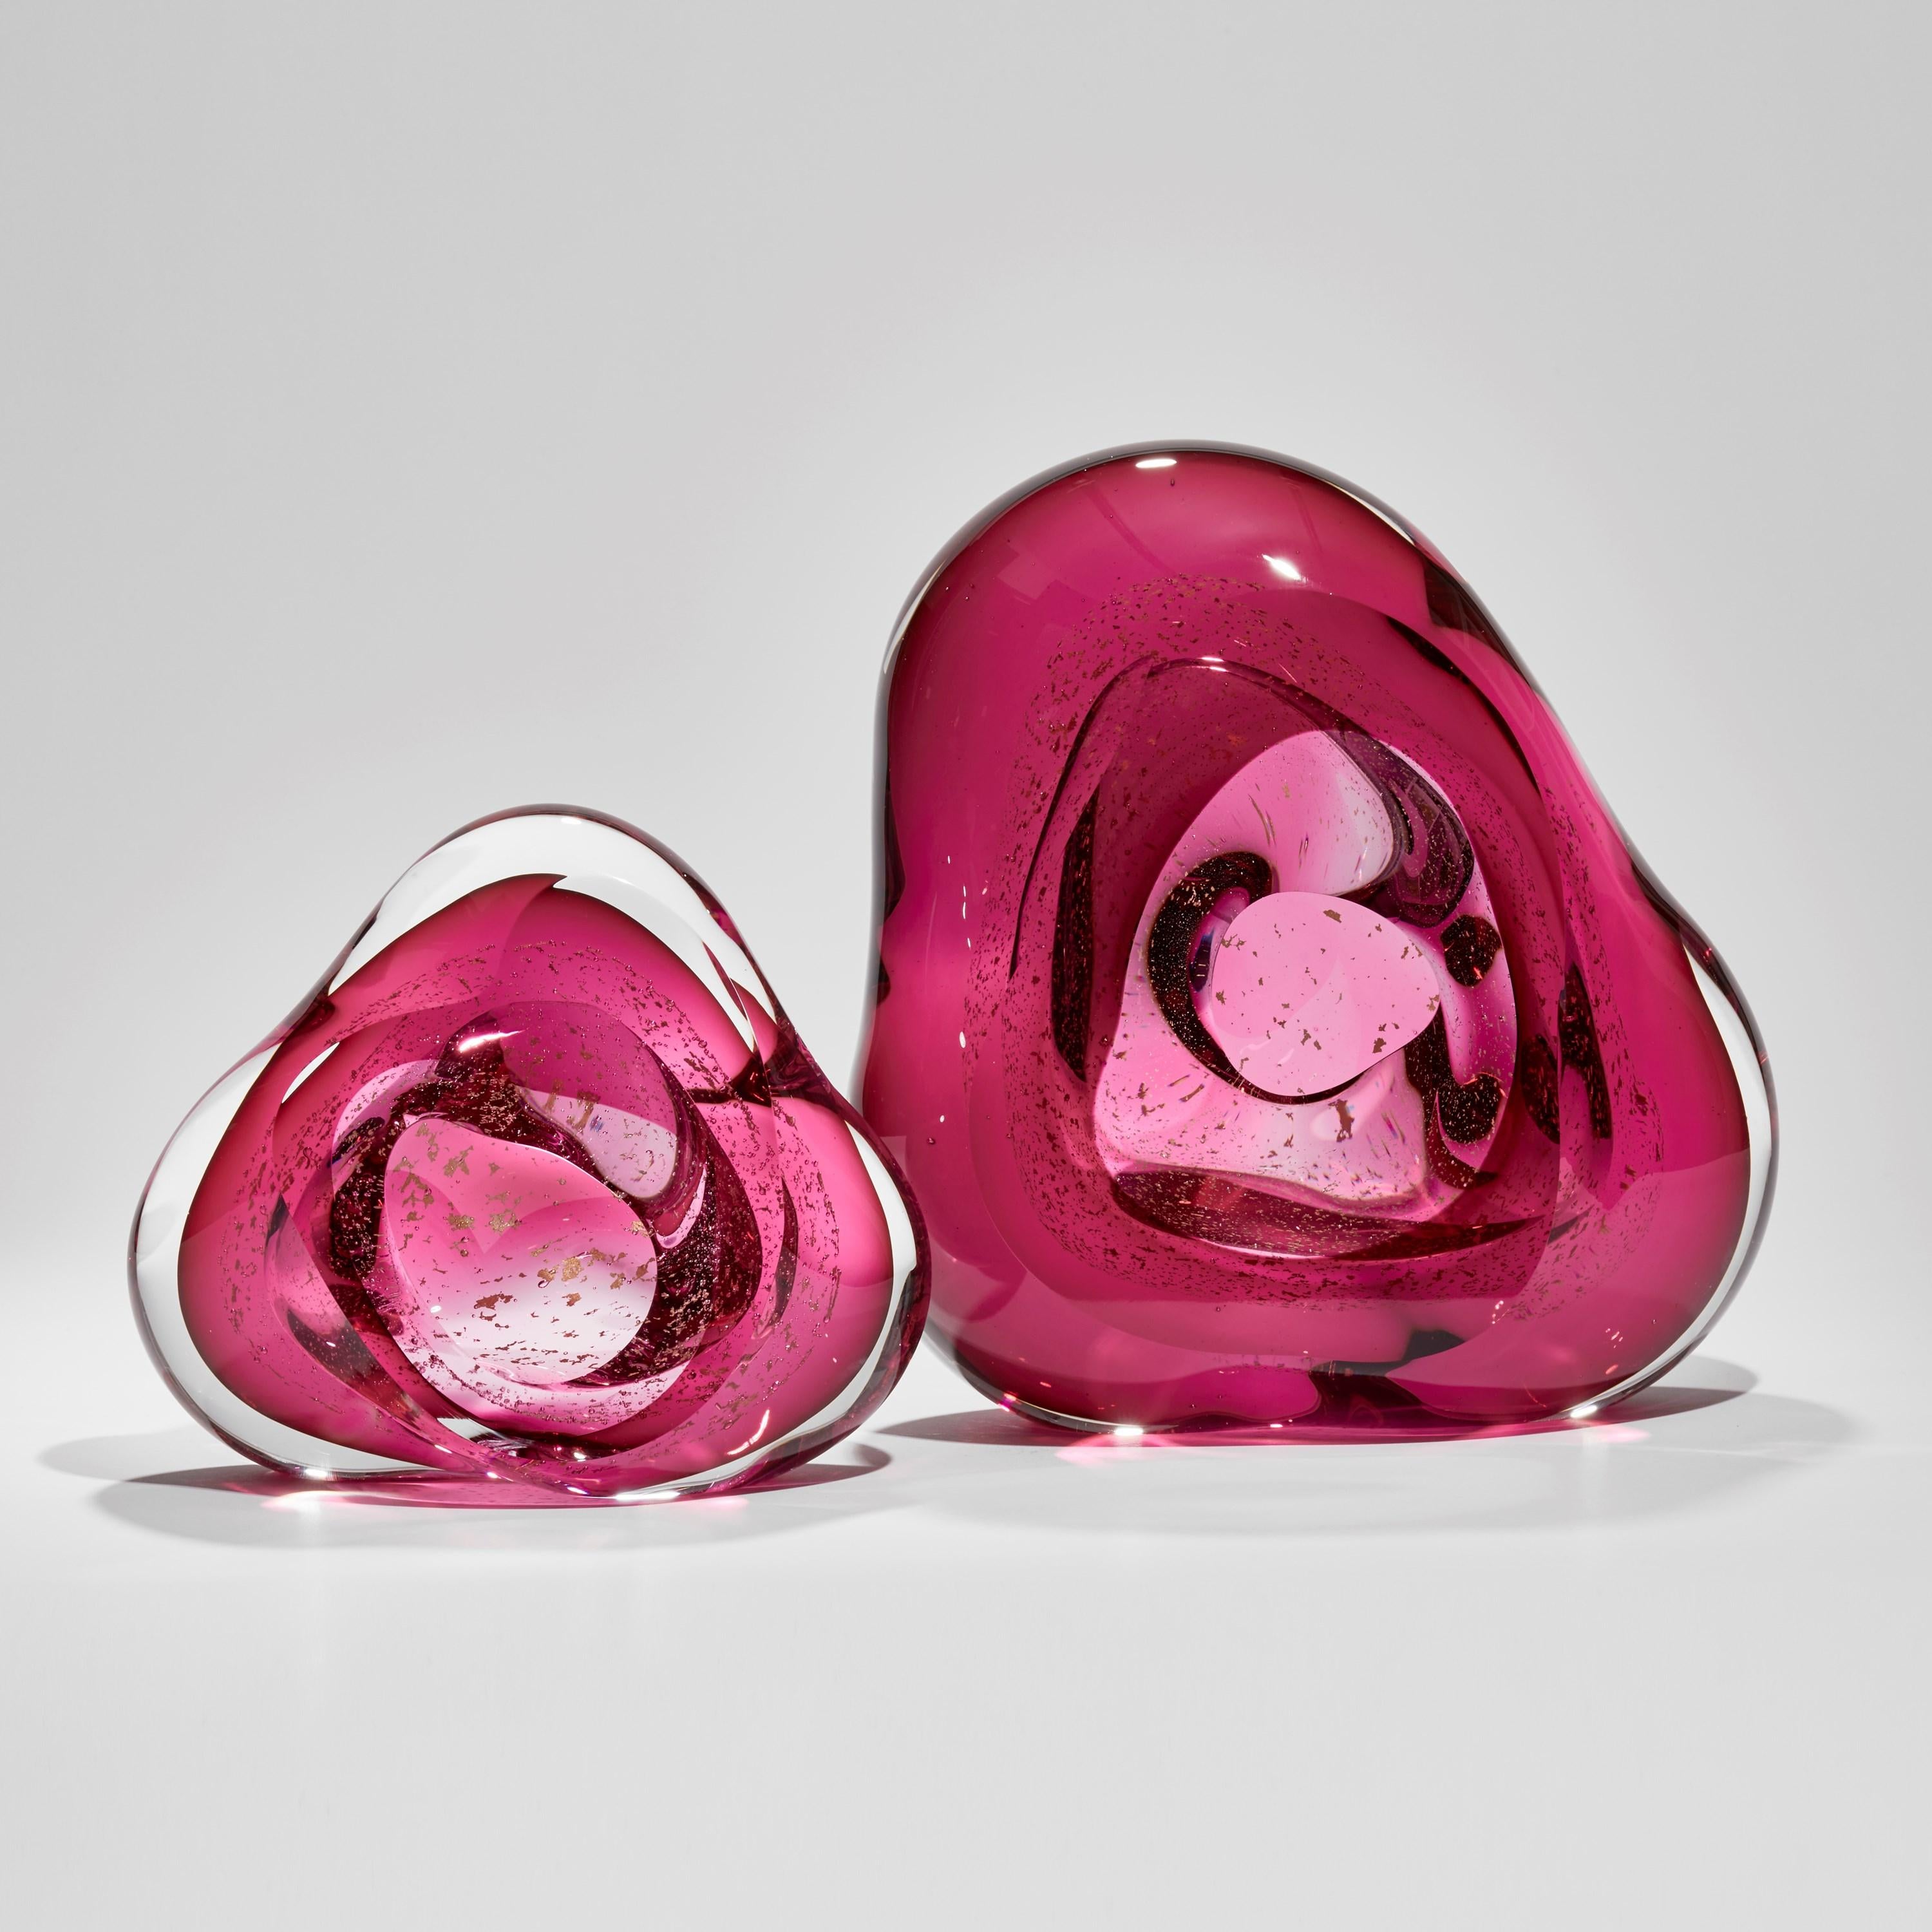 Oro Vug in Fuchsia I, Gold & Pink Glass Geode Sculpture by Samantha Donaldson In New Condition For Sale In London, GB